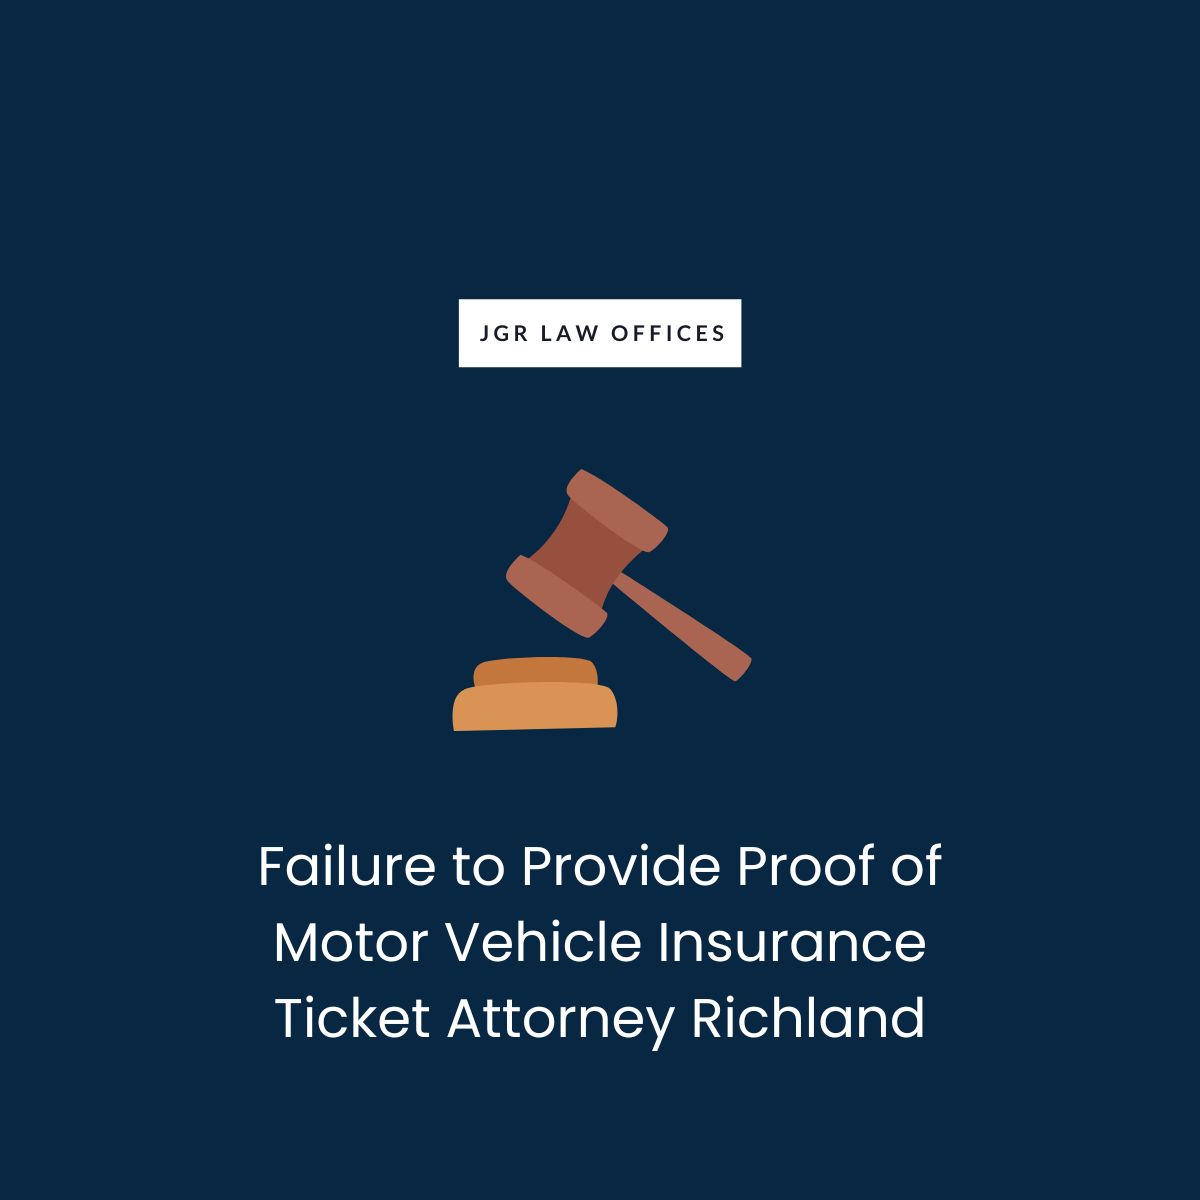 Failure to Provide Proof of Motor Vehicle Insurance Ticket Attorney Richland